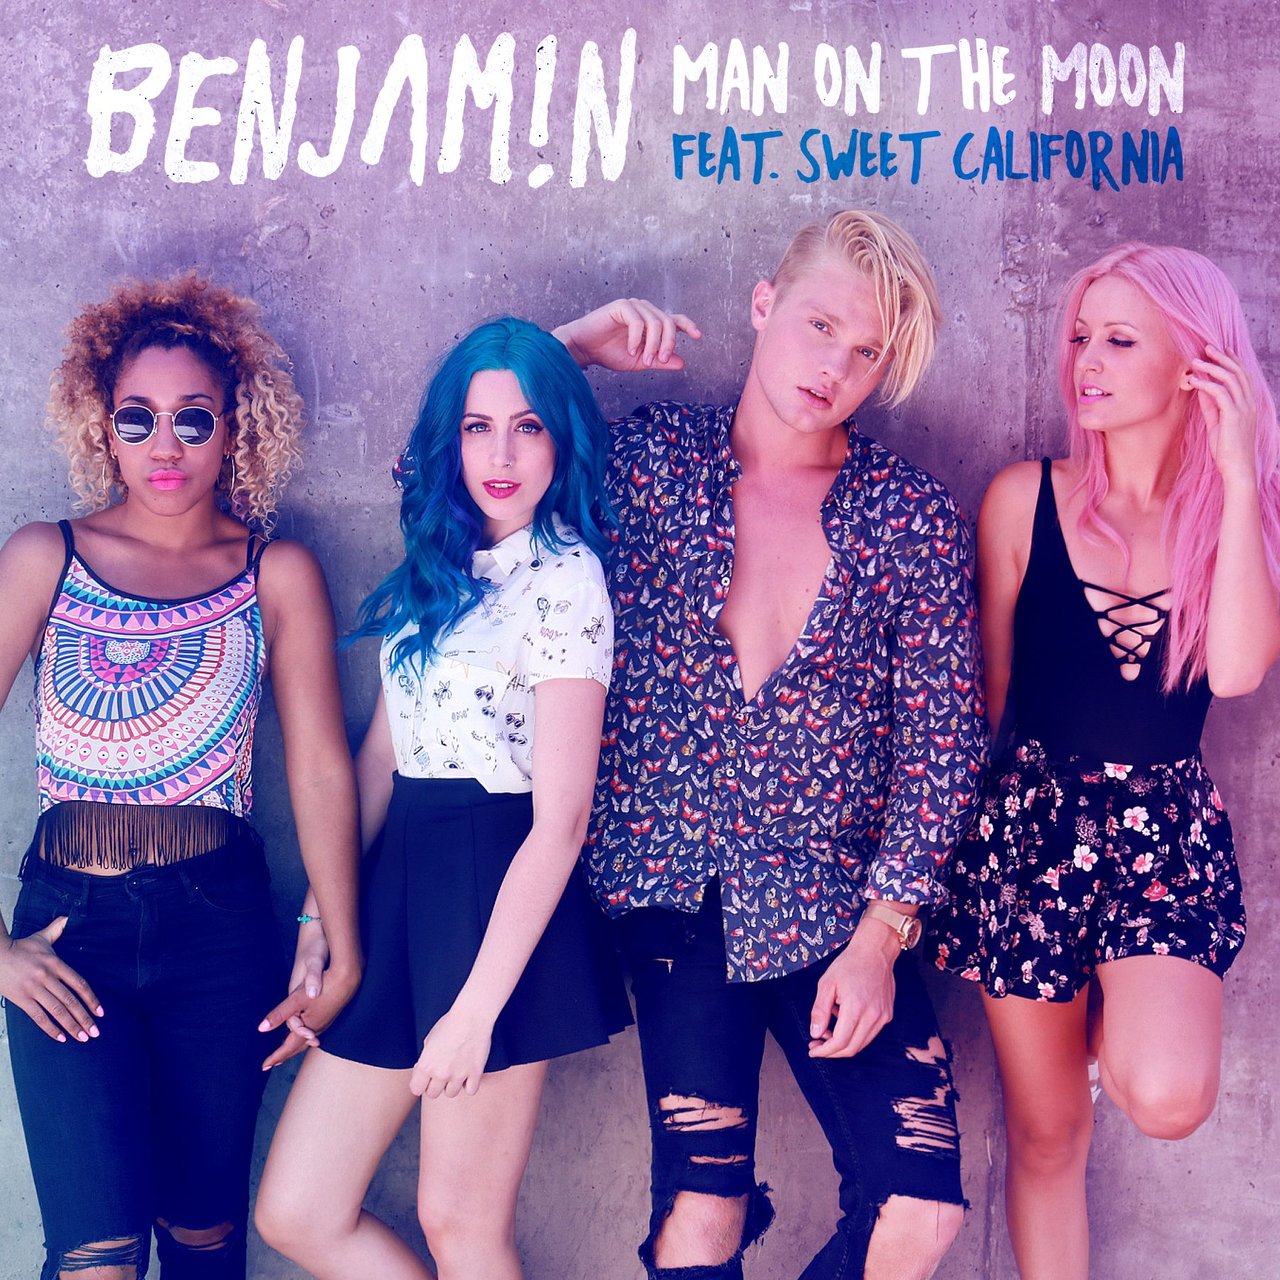 Benjamin ft. featuring Sweet California Man On the Moon cover artwork